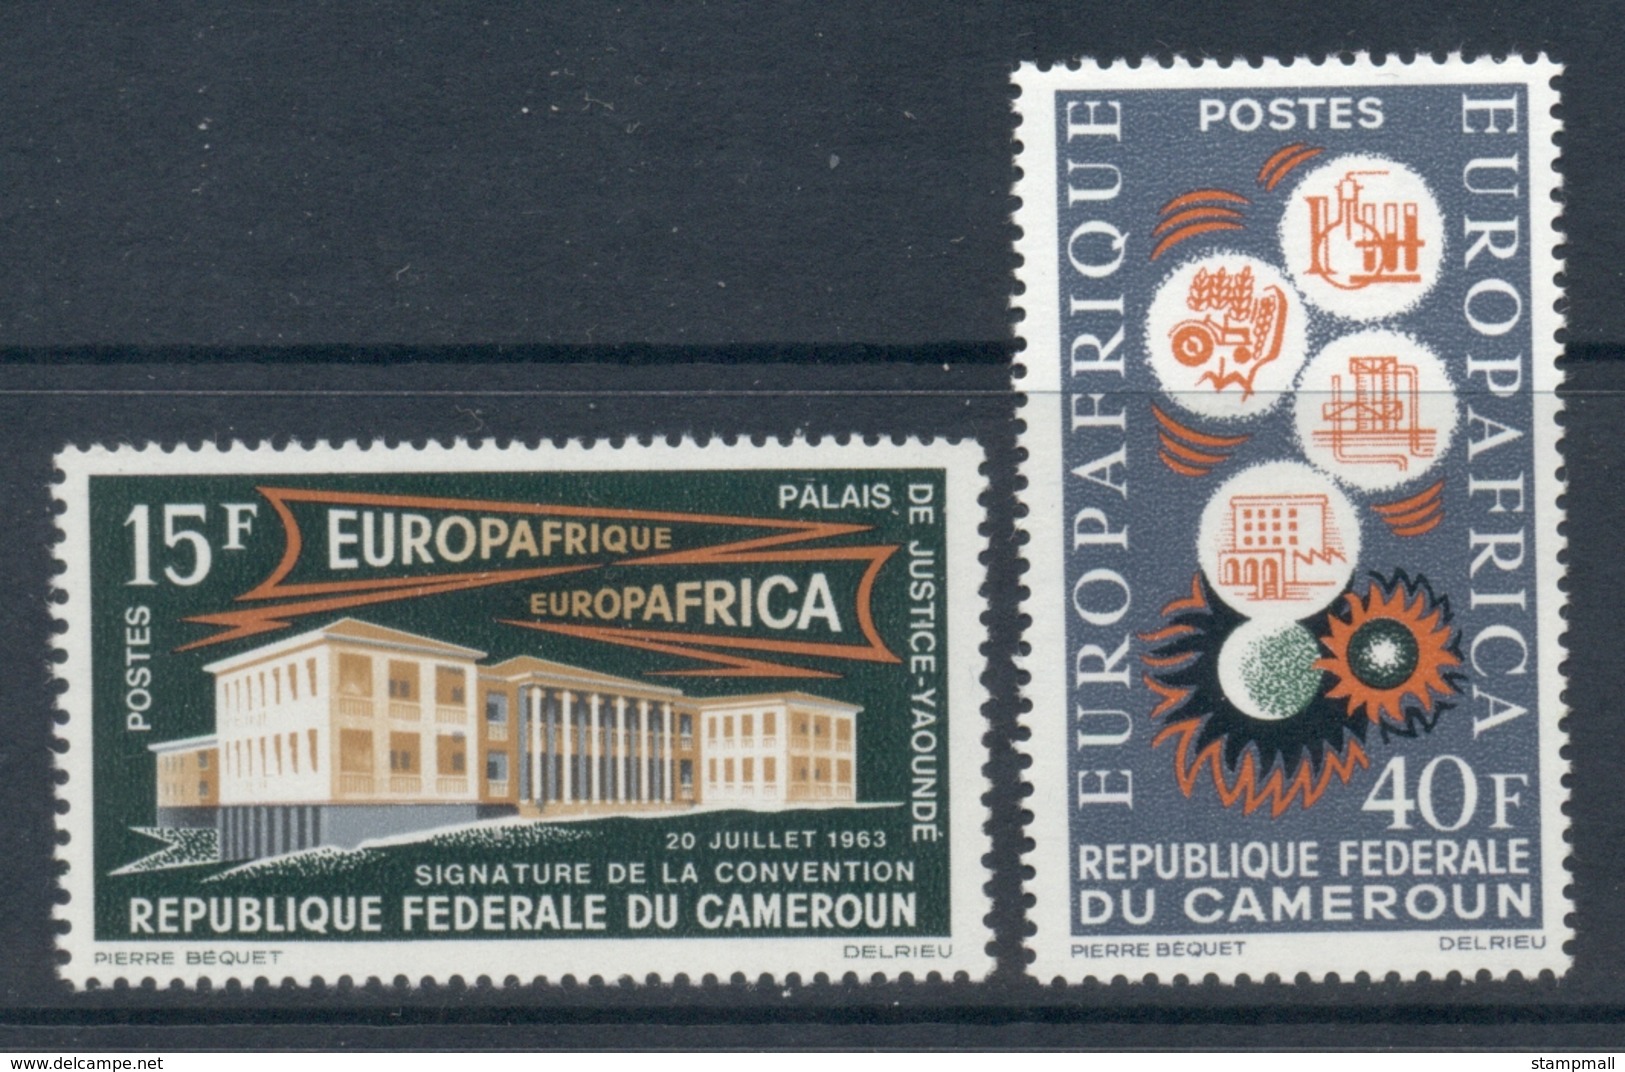 Cameroun 1964 Europafrica MLH - Unused Stamps